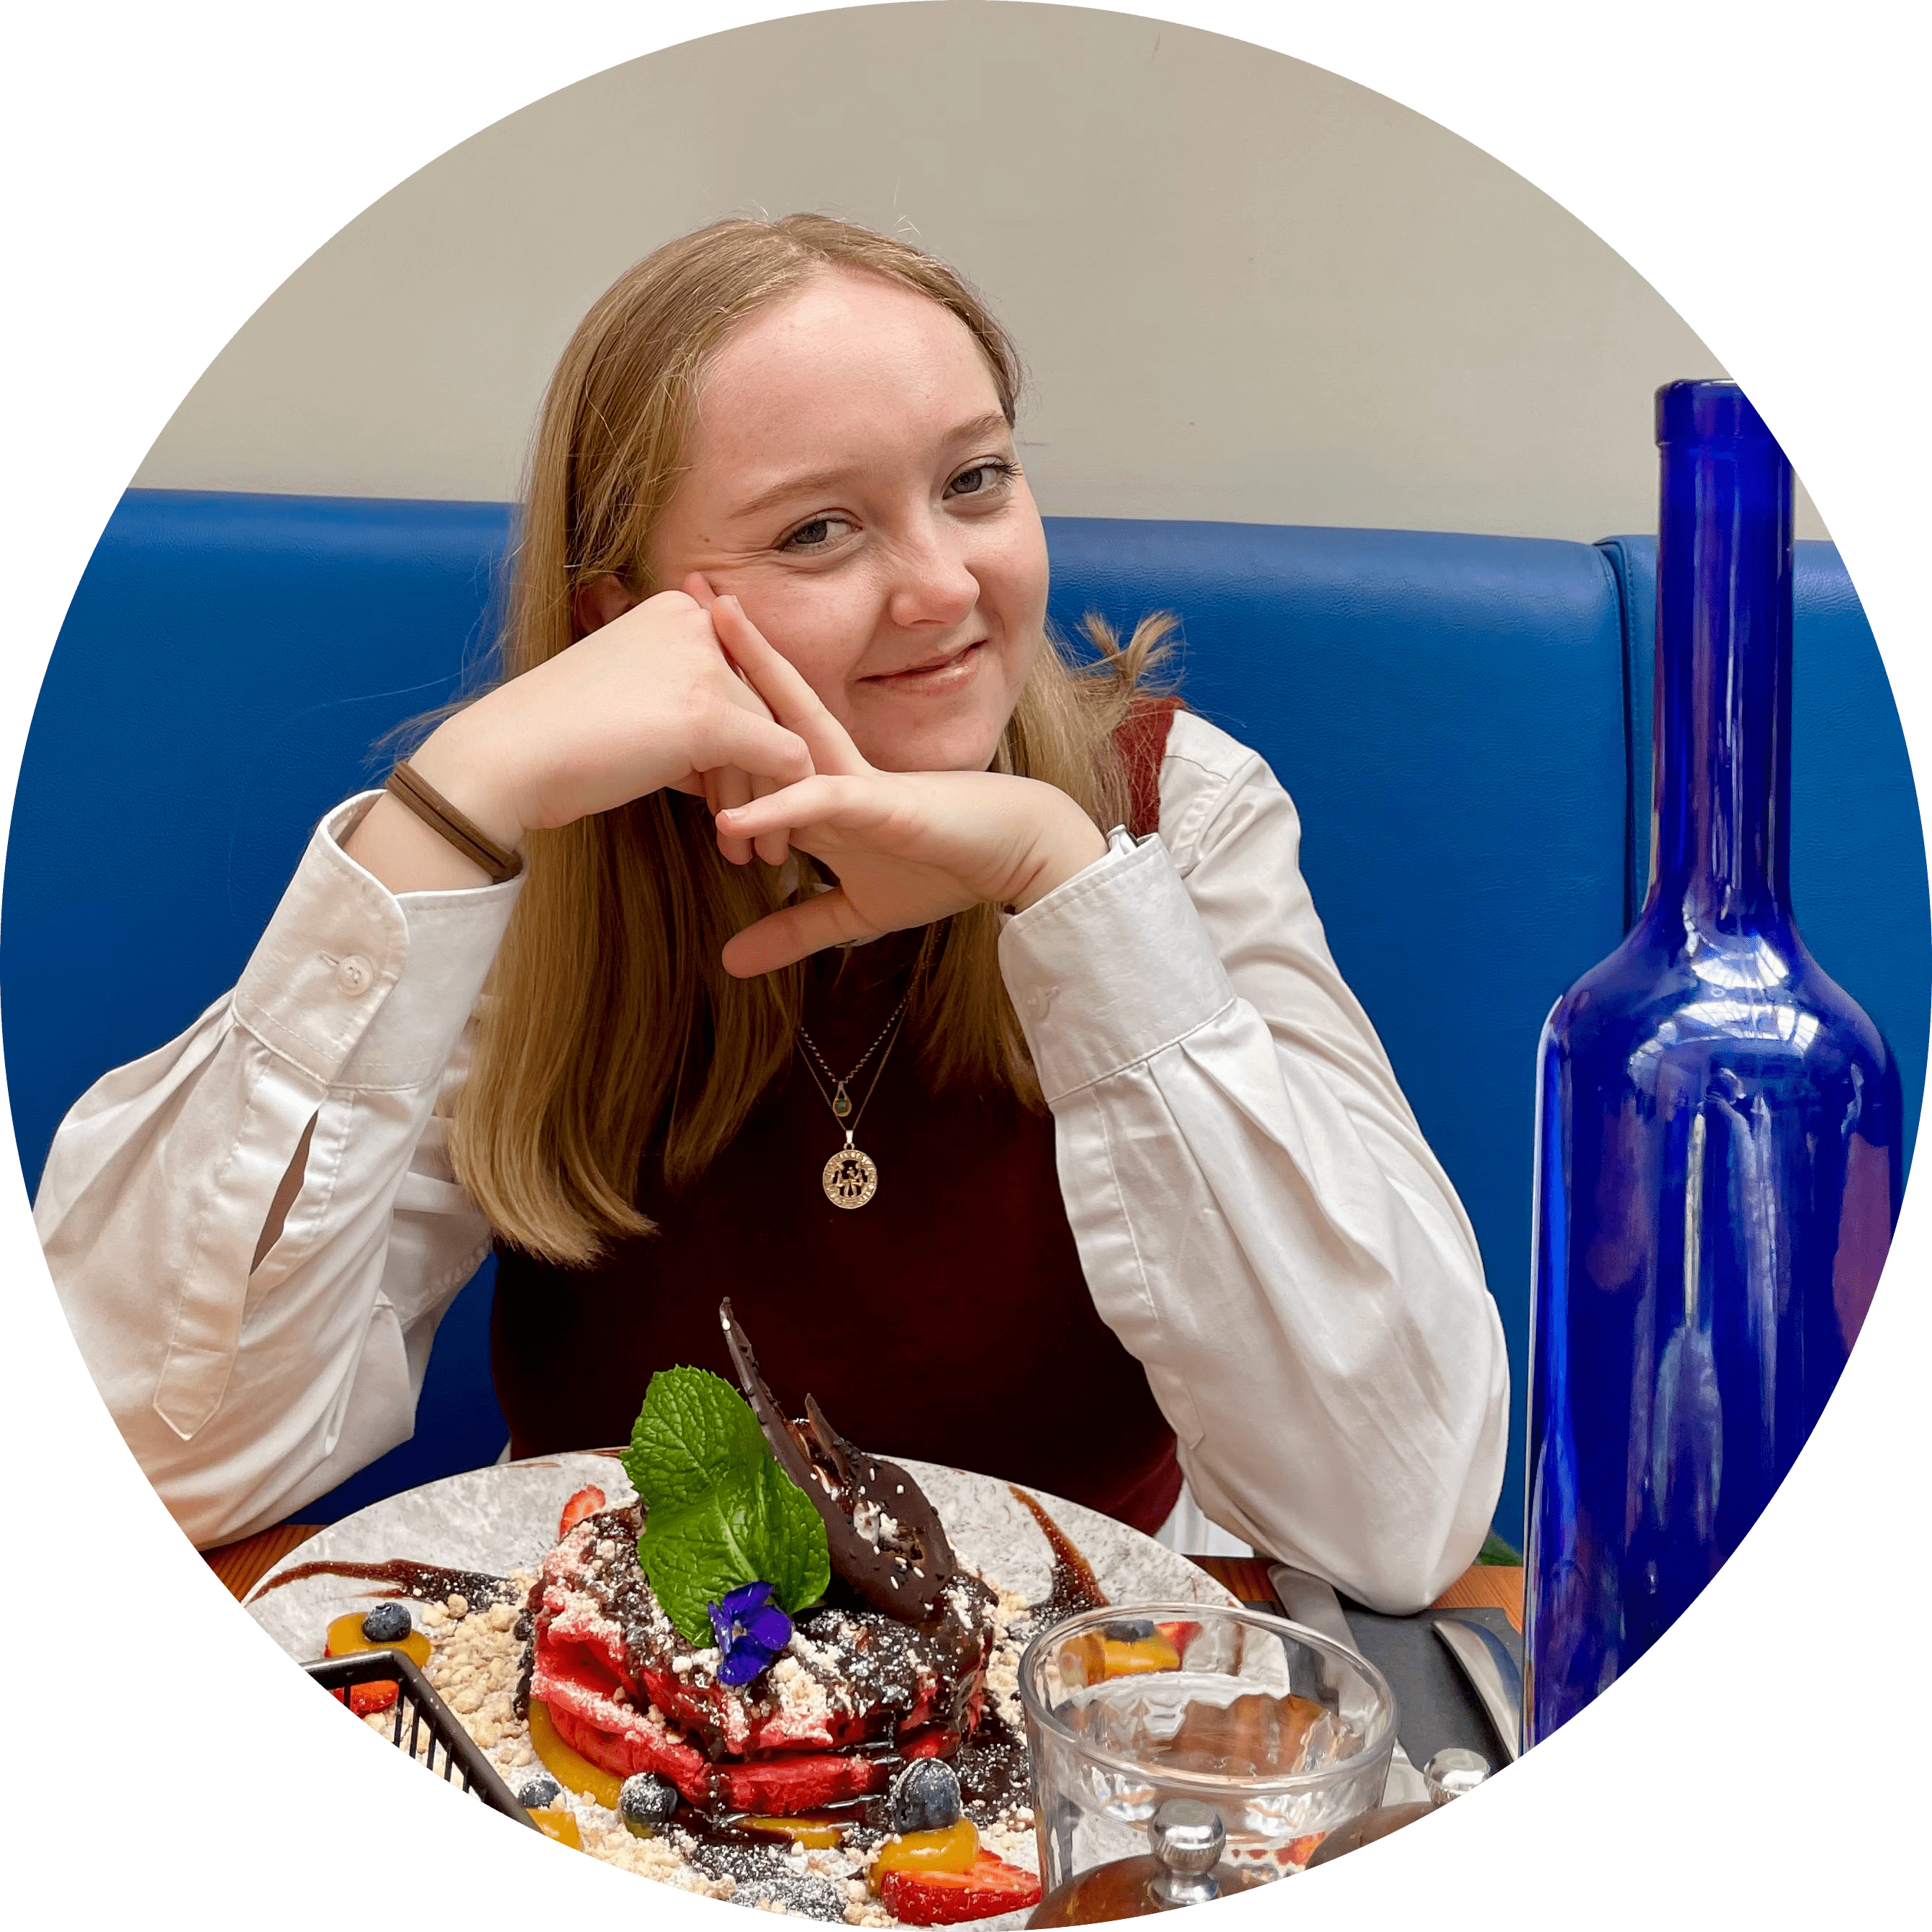 An image of our current treasurer, Jessica Bowen. Jess is smiling with her head propped up by her hands, and is sitting on a blue cushioned booth in front of a fancy-looking plate of sweet food. A drinking glass and blue glass bottle are also visible to the right of the image. 